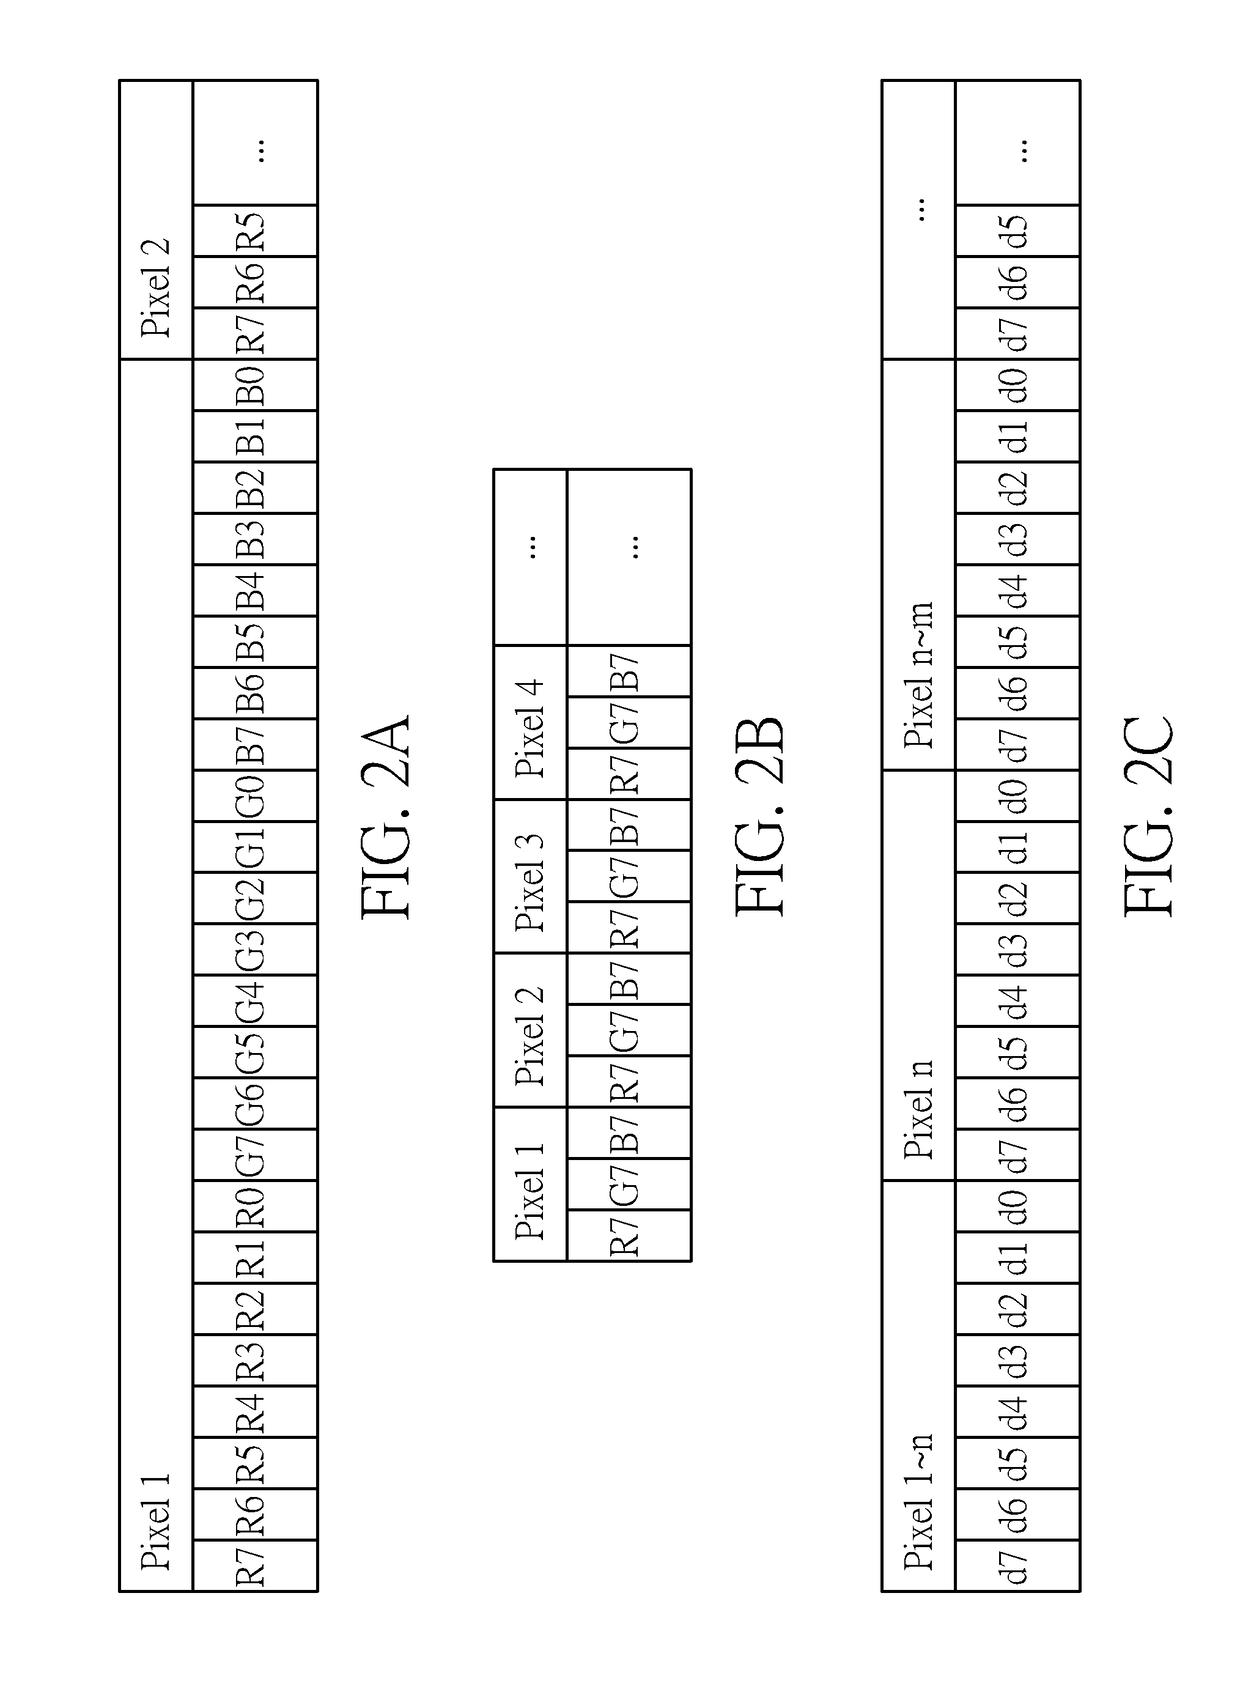 Data Compression System for Liquid Crystal Display and Related Power Saving Method